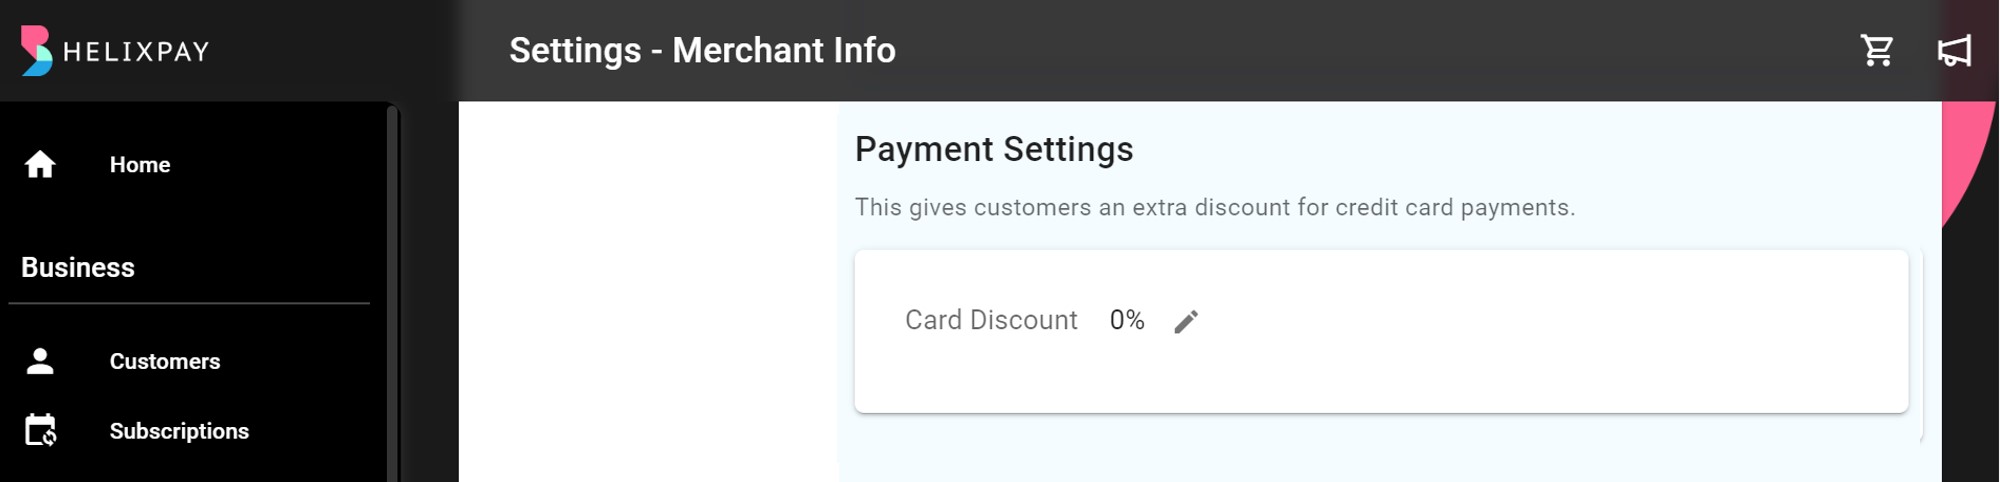 The merchants can incentivize their customers by giving additional discount for using credit card for paying.